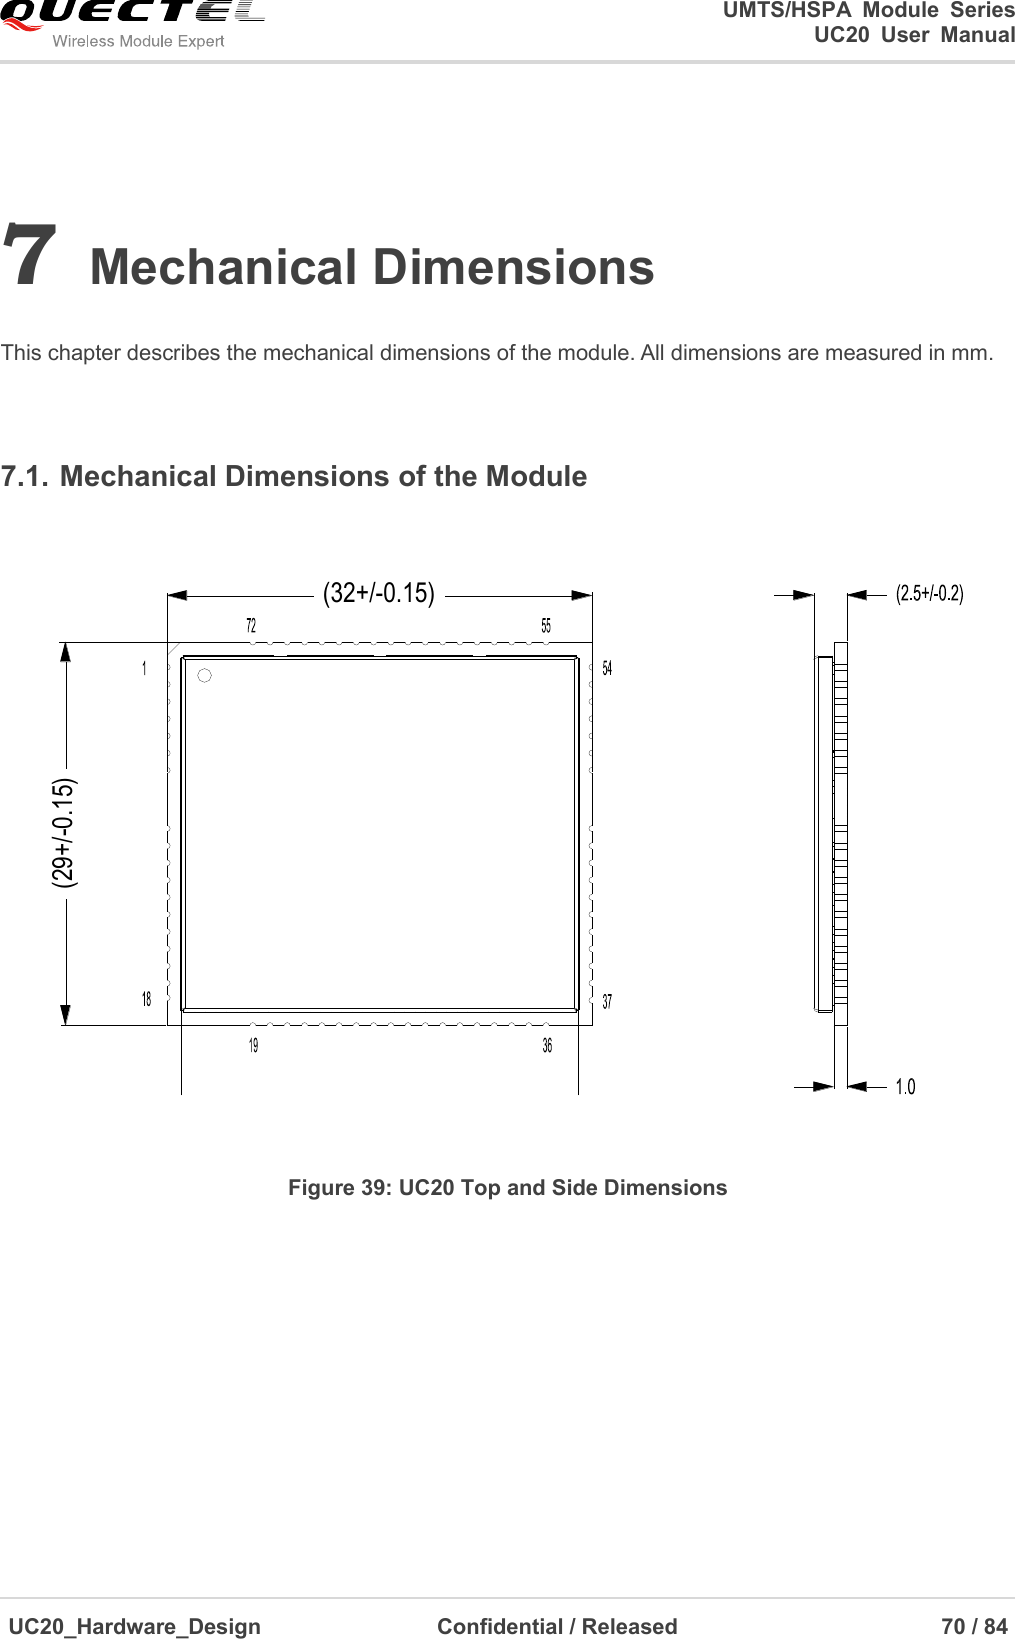                                                                                                                                               UMTS/HSPA  Module  Series                                                                 UC20  User  Manual  UC20_Hardware_Design                  Confidential / Released                            70 / 84     7 Mechanical Dimensions  This chapter describes the mechanical dimensions of the module. All dimensions are measured in mm.  7.1. Mechanical Dimensions of the Module (32+/-0.15)(29+/-0.15) Figure 39: UC20 Top and Side Dimensions  